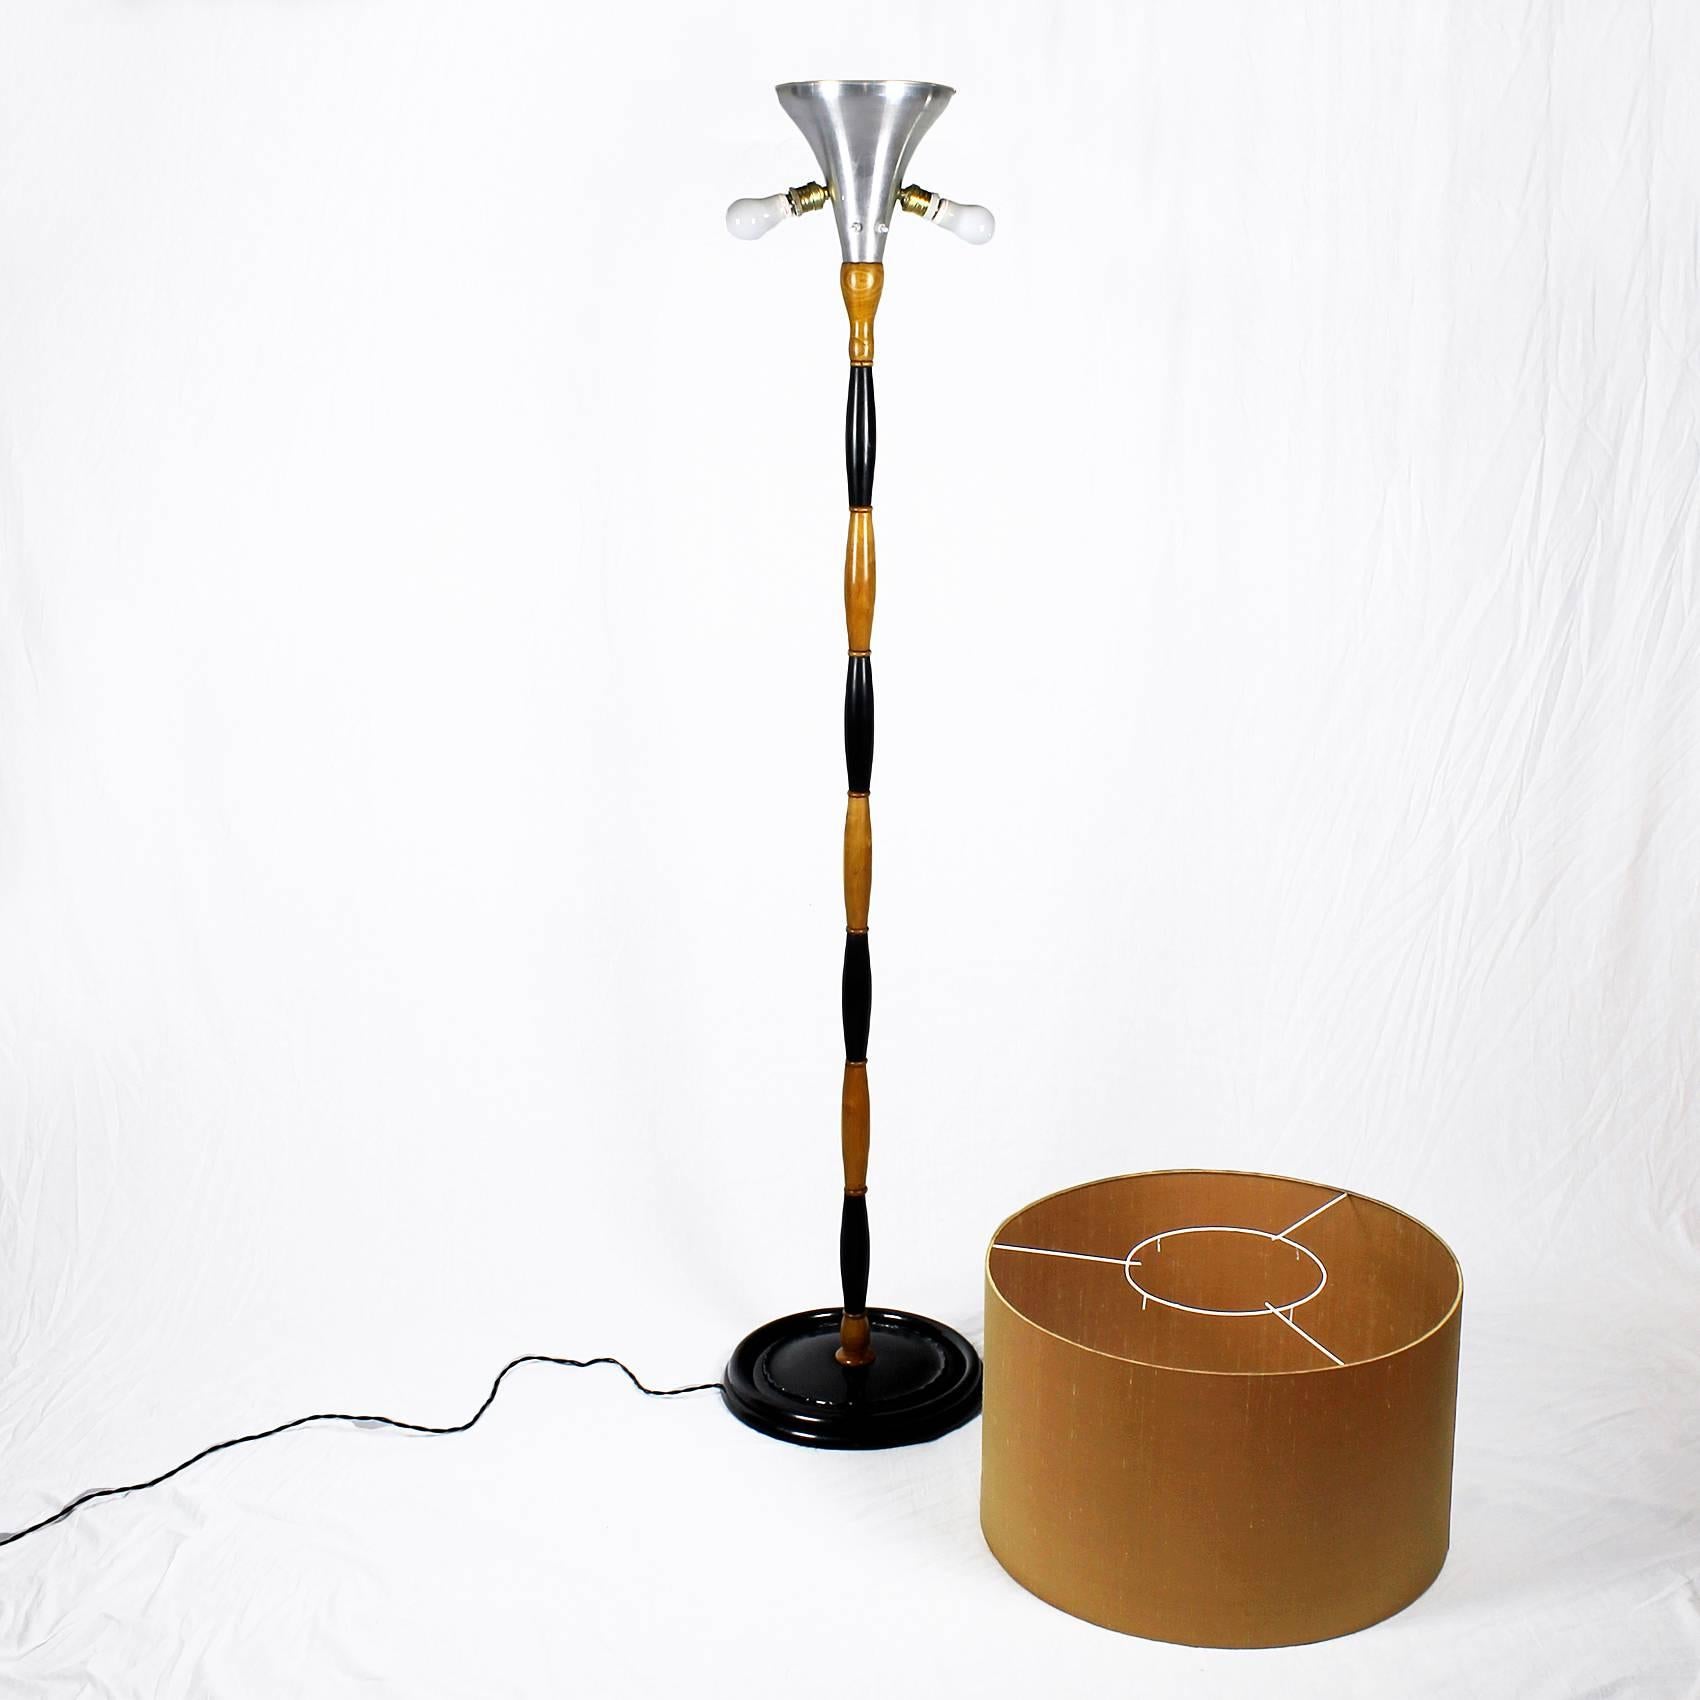 Standing lamp, two-colored stand, ebony stained beech and sycamore, french polish, golden silk lampshade.

Italy, circa 1940.